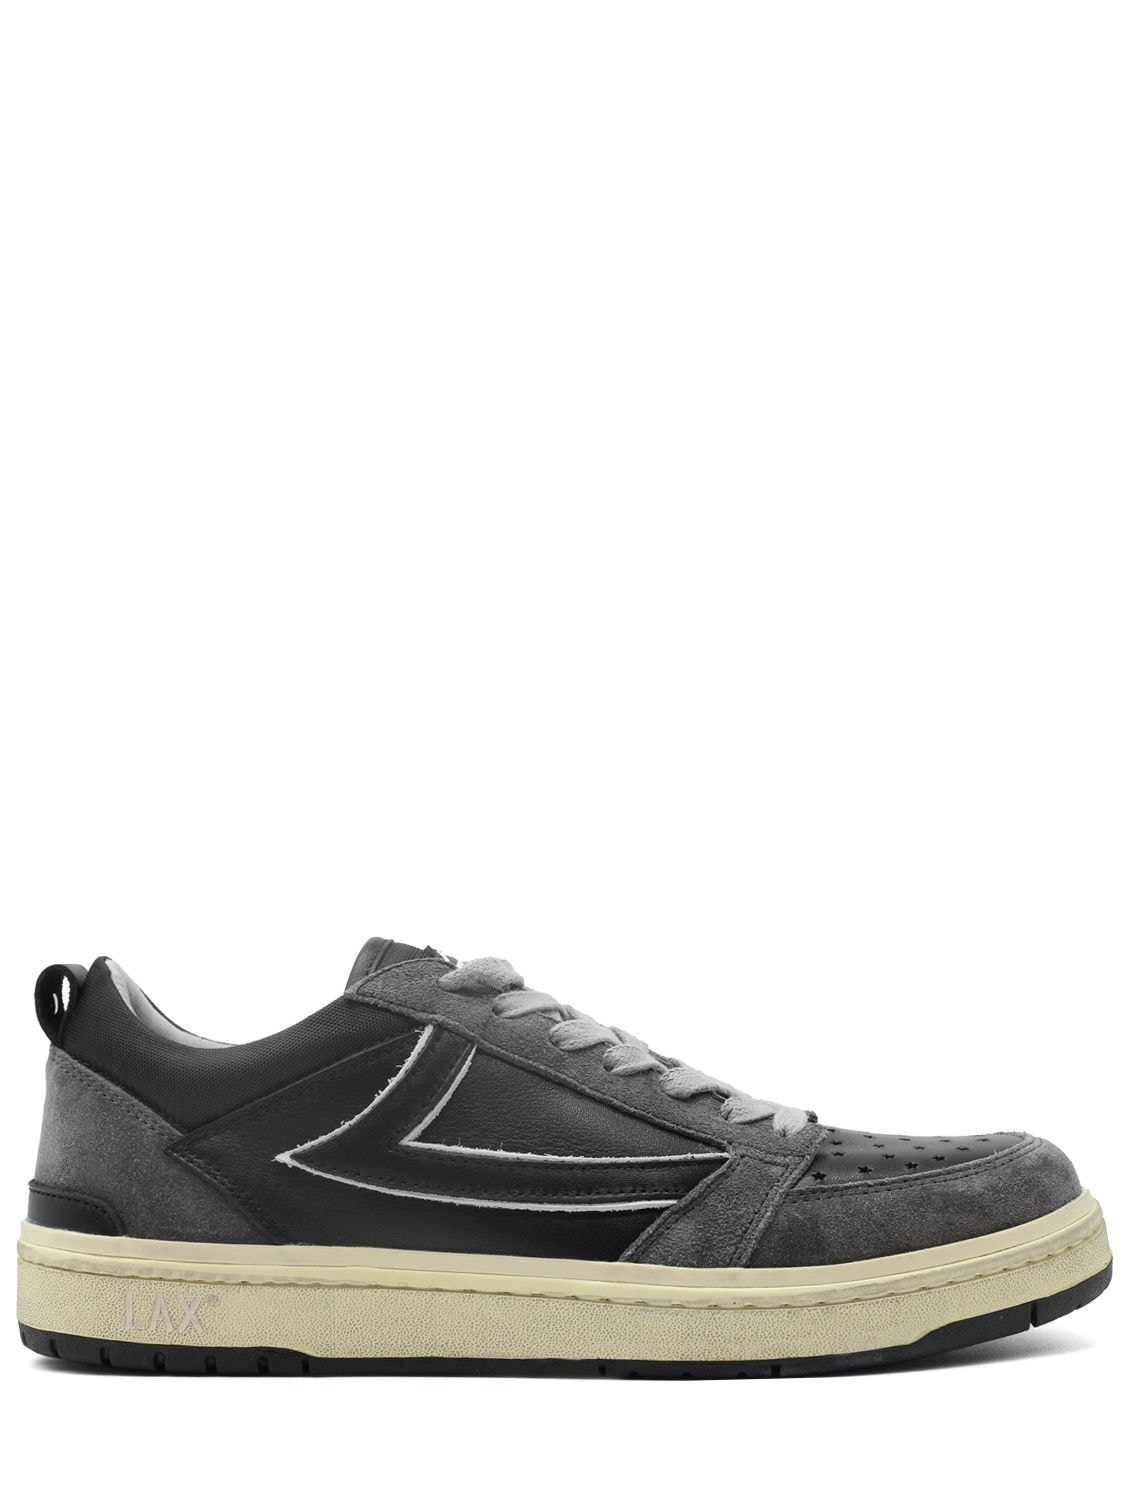 Htc Los Angeles Starlight Leather Low Top Trainers In Black,grey